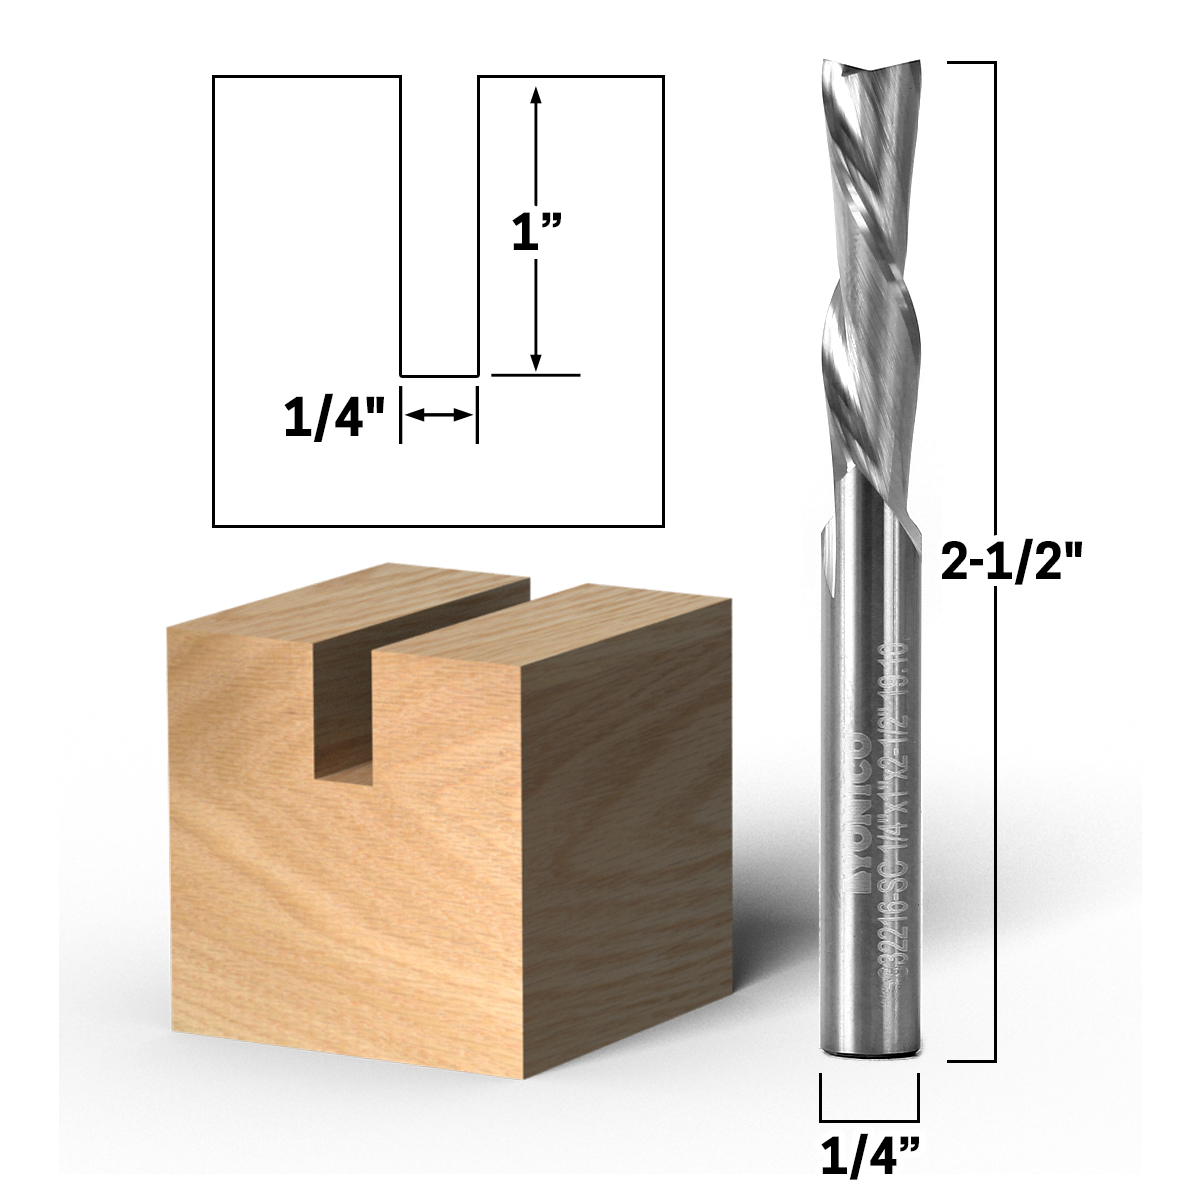 1 NEW  Yonico 3/4" D Straight Carbide Tipped Router Bit 1/2" Shank 2 flute y4 